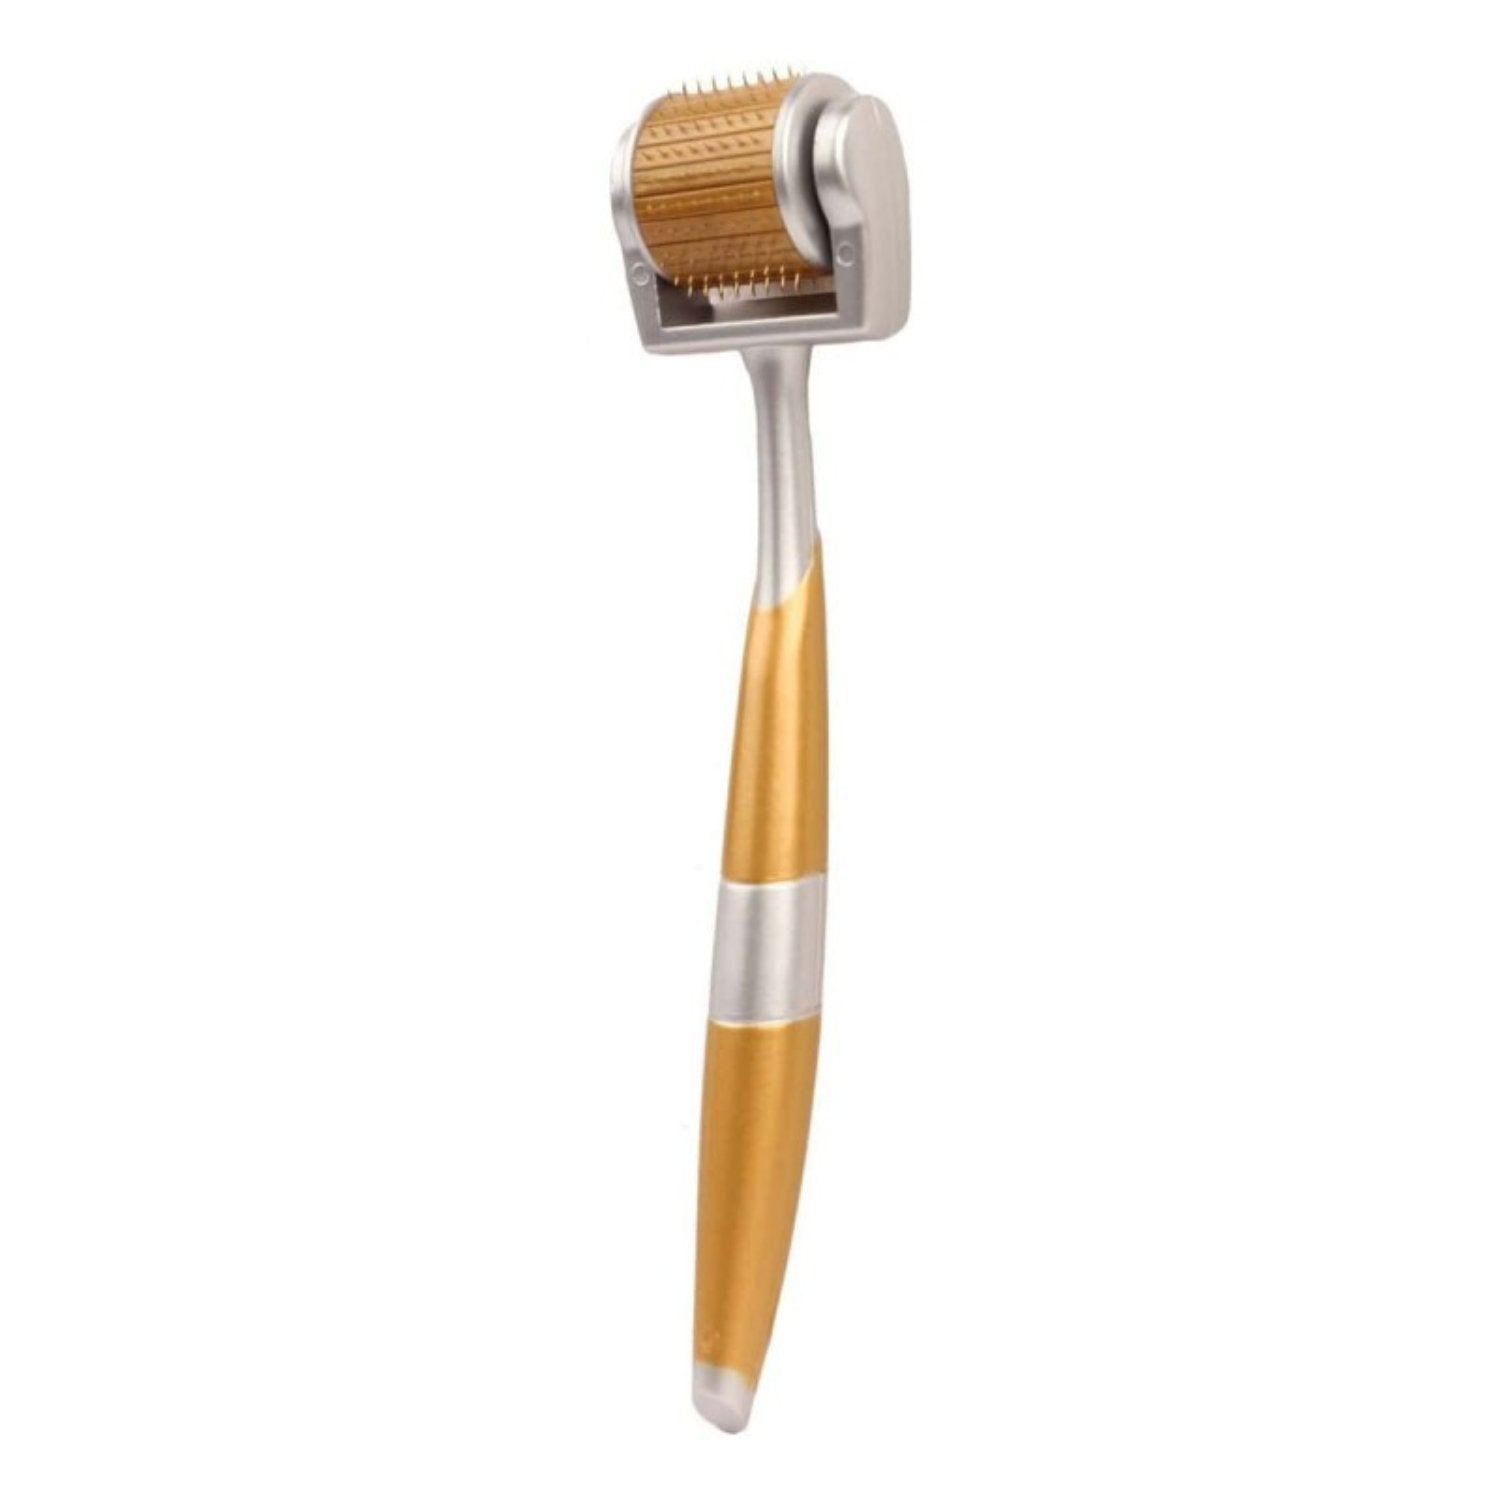 GTS 192 Gold Derma Roller 0.5mm - Dr. Pen Store - Dr. Pen Buy Genuine Dr Pen Products with Trust